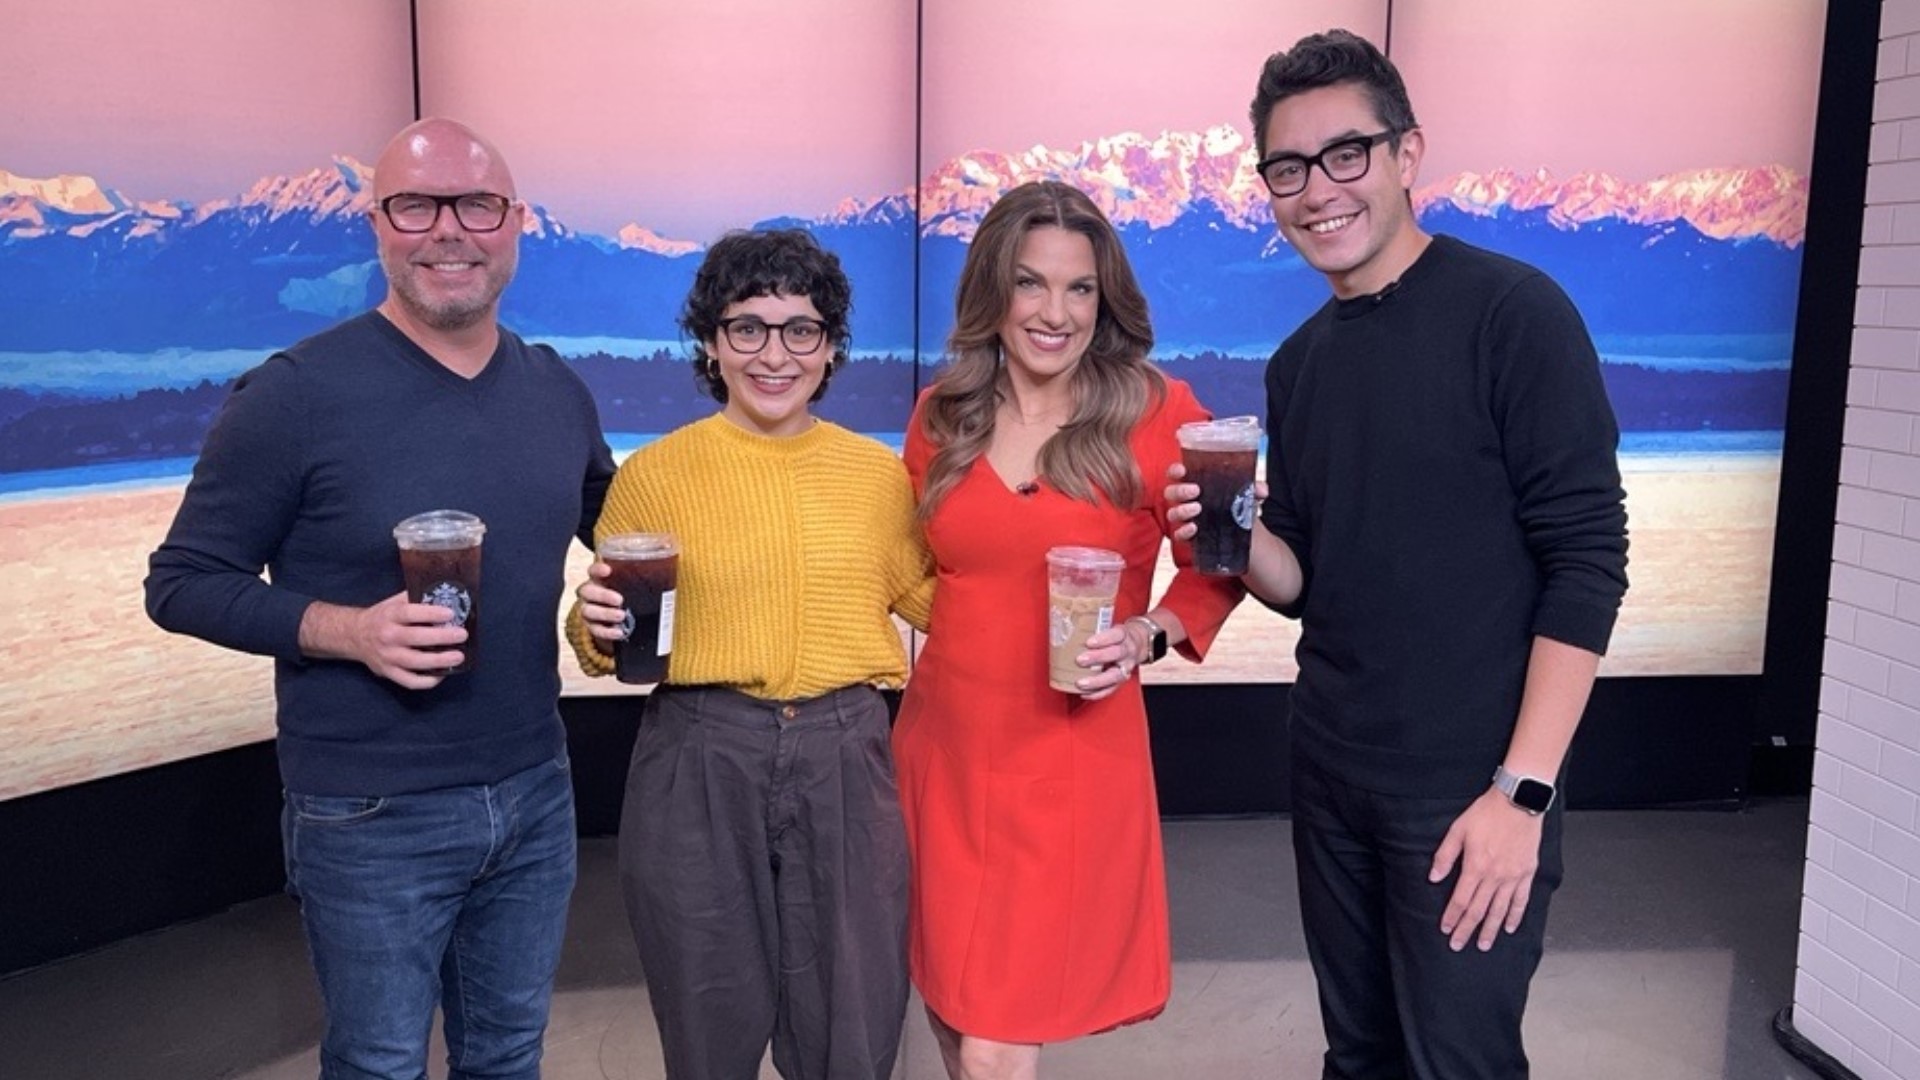 Former TV news anchor Travis Mayfield, Advice Columnist for Seattle Gay News Isabele Mata and New Day Executive Producer Joseph Suttner talk pop culture with Amity.